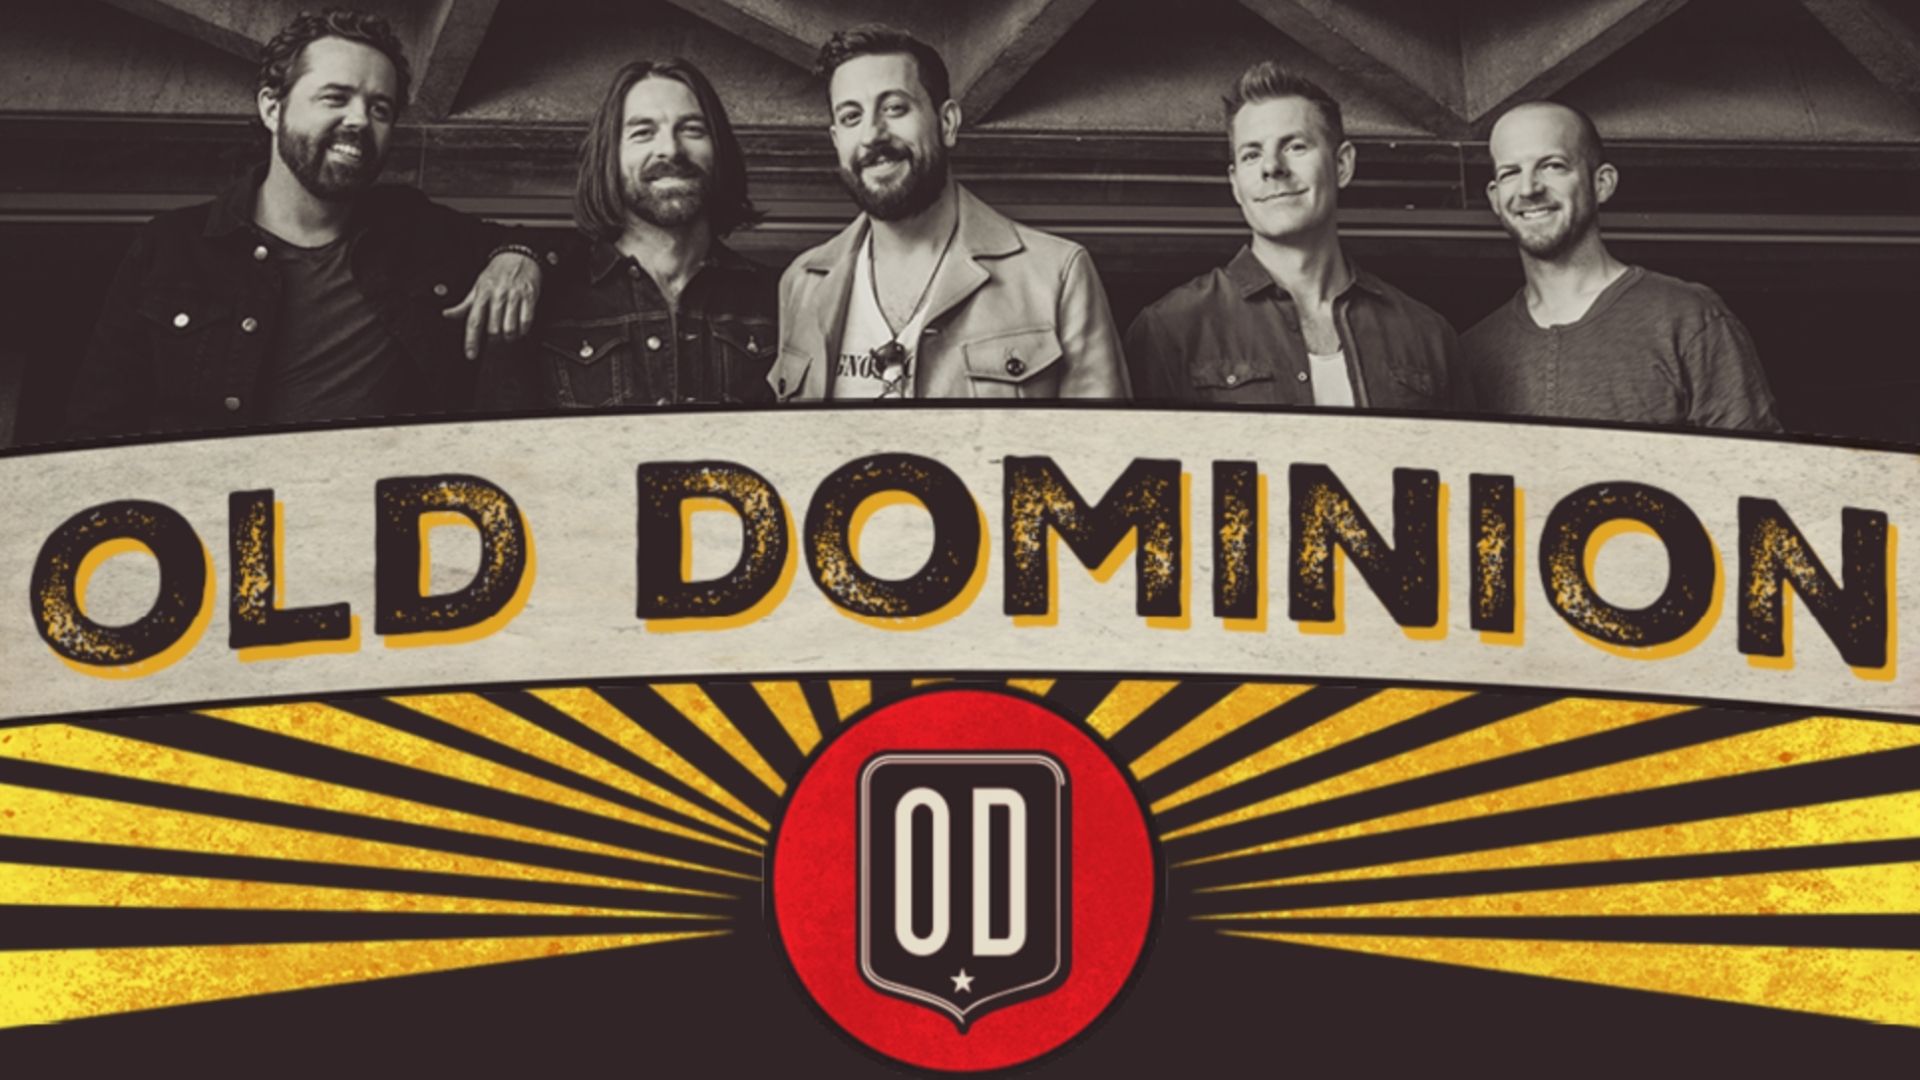 Old Dominion at Stir Cove